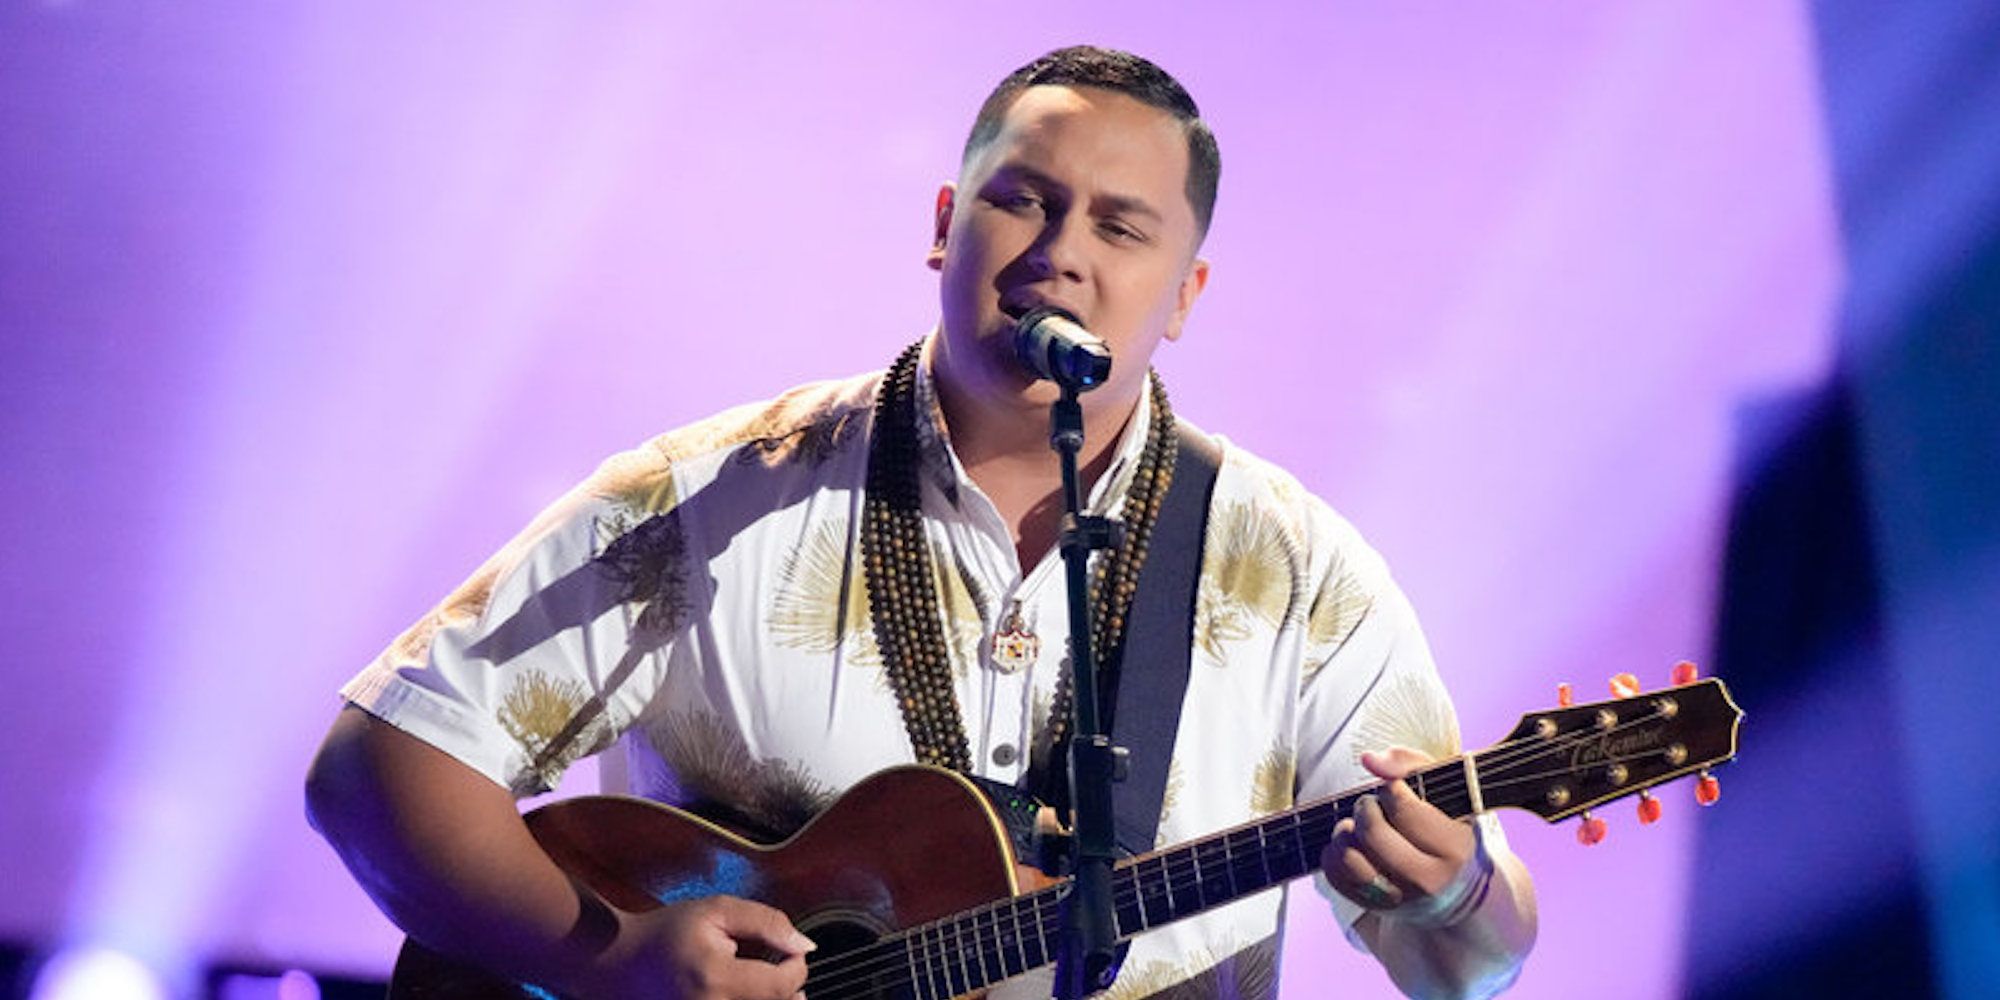 Vocalist Kamalei Kawa'a auditions accompanied by an acoustic guitar on 'The Voice'